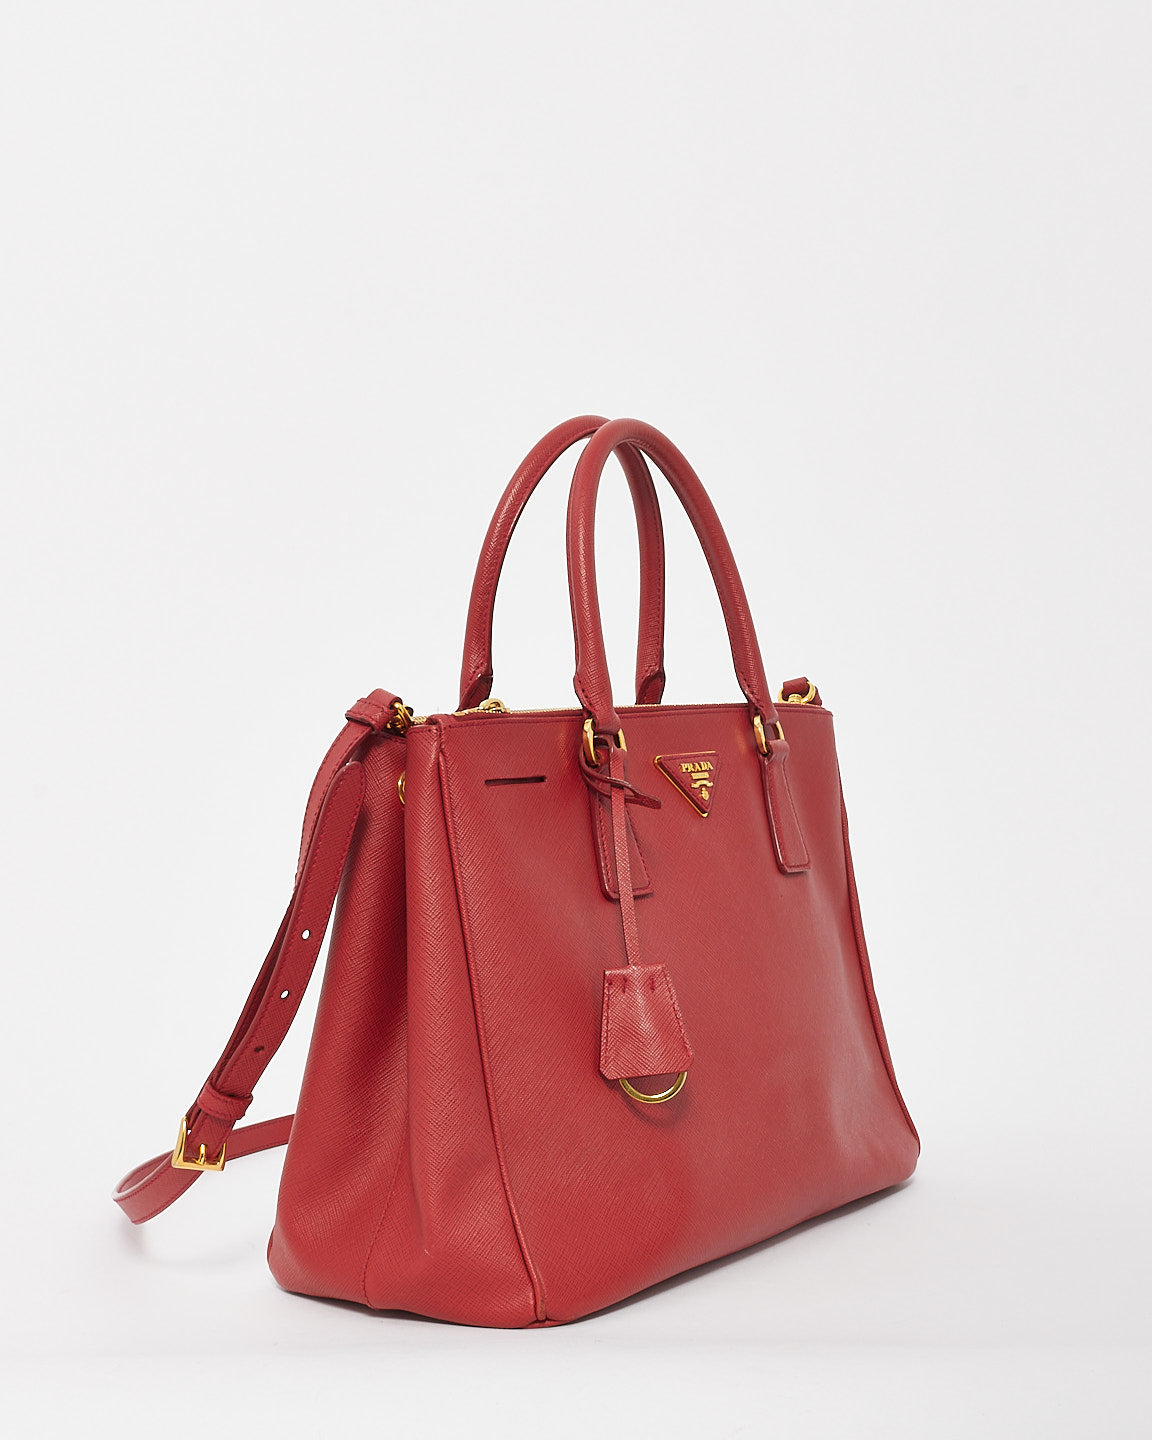 Prada Red Saffiano Leather Large Galleria Double Zip Tote Bag